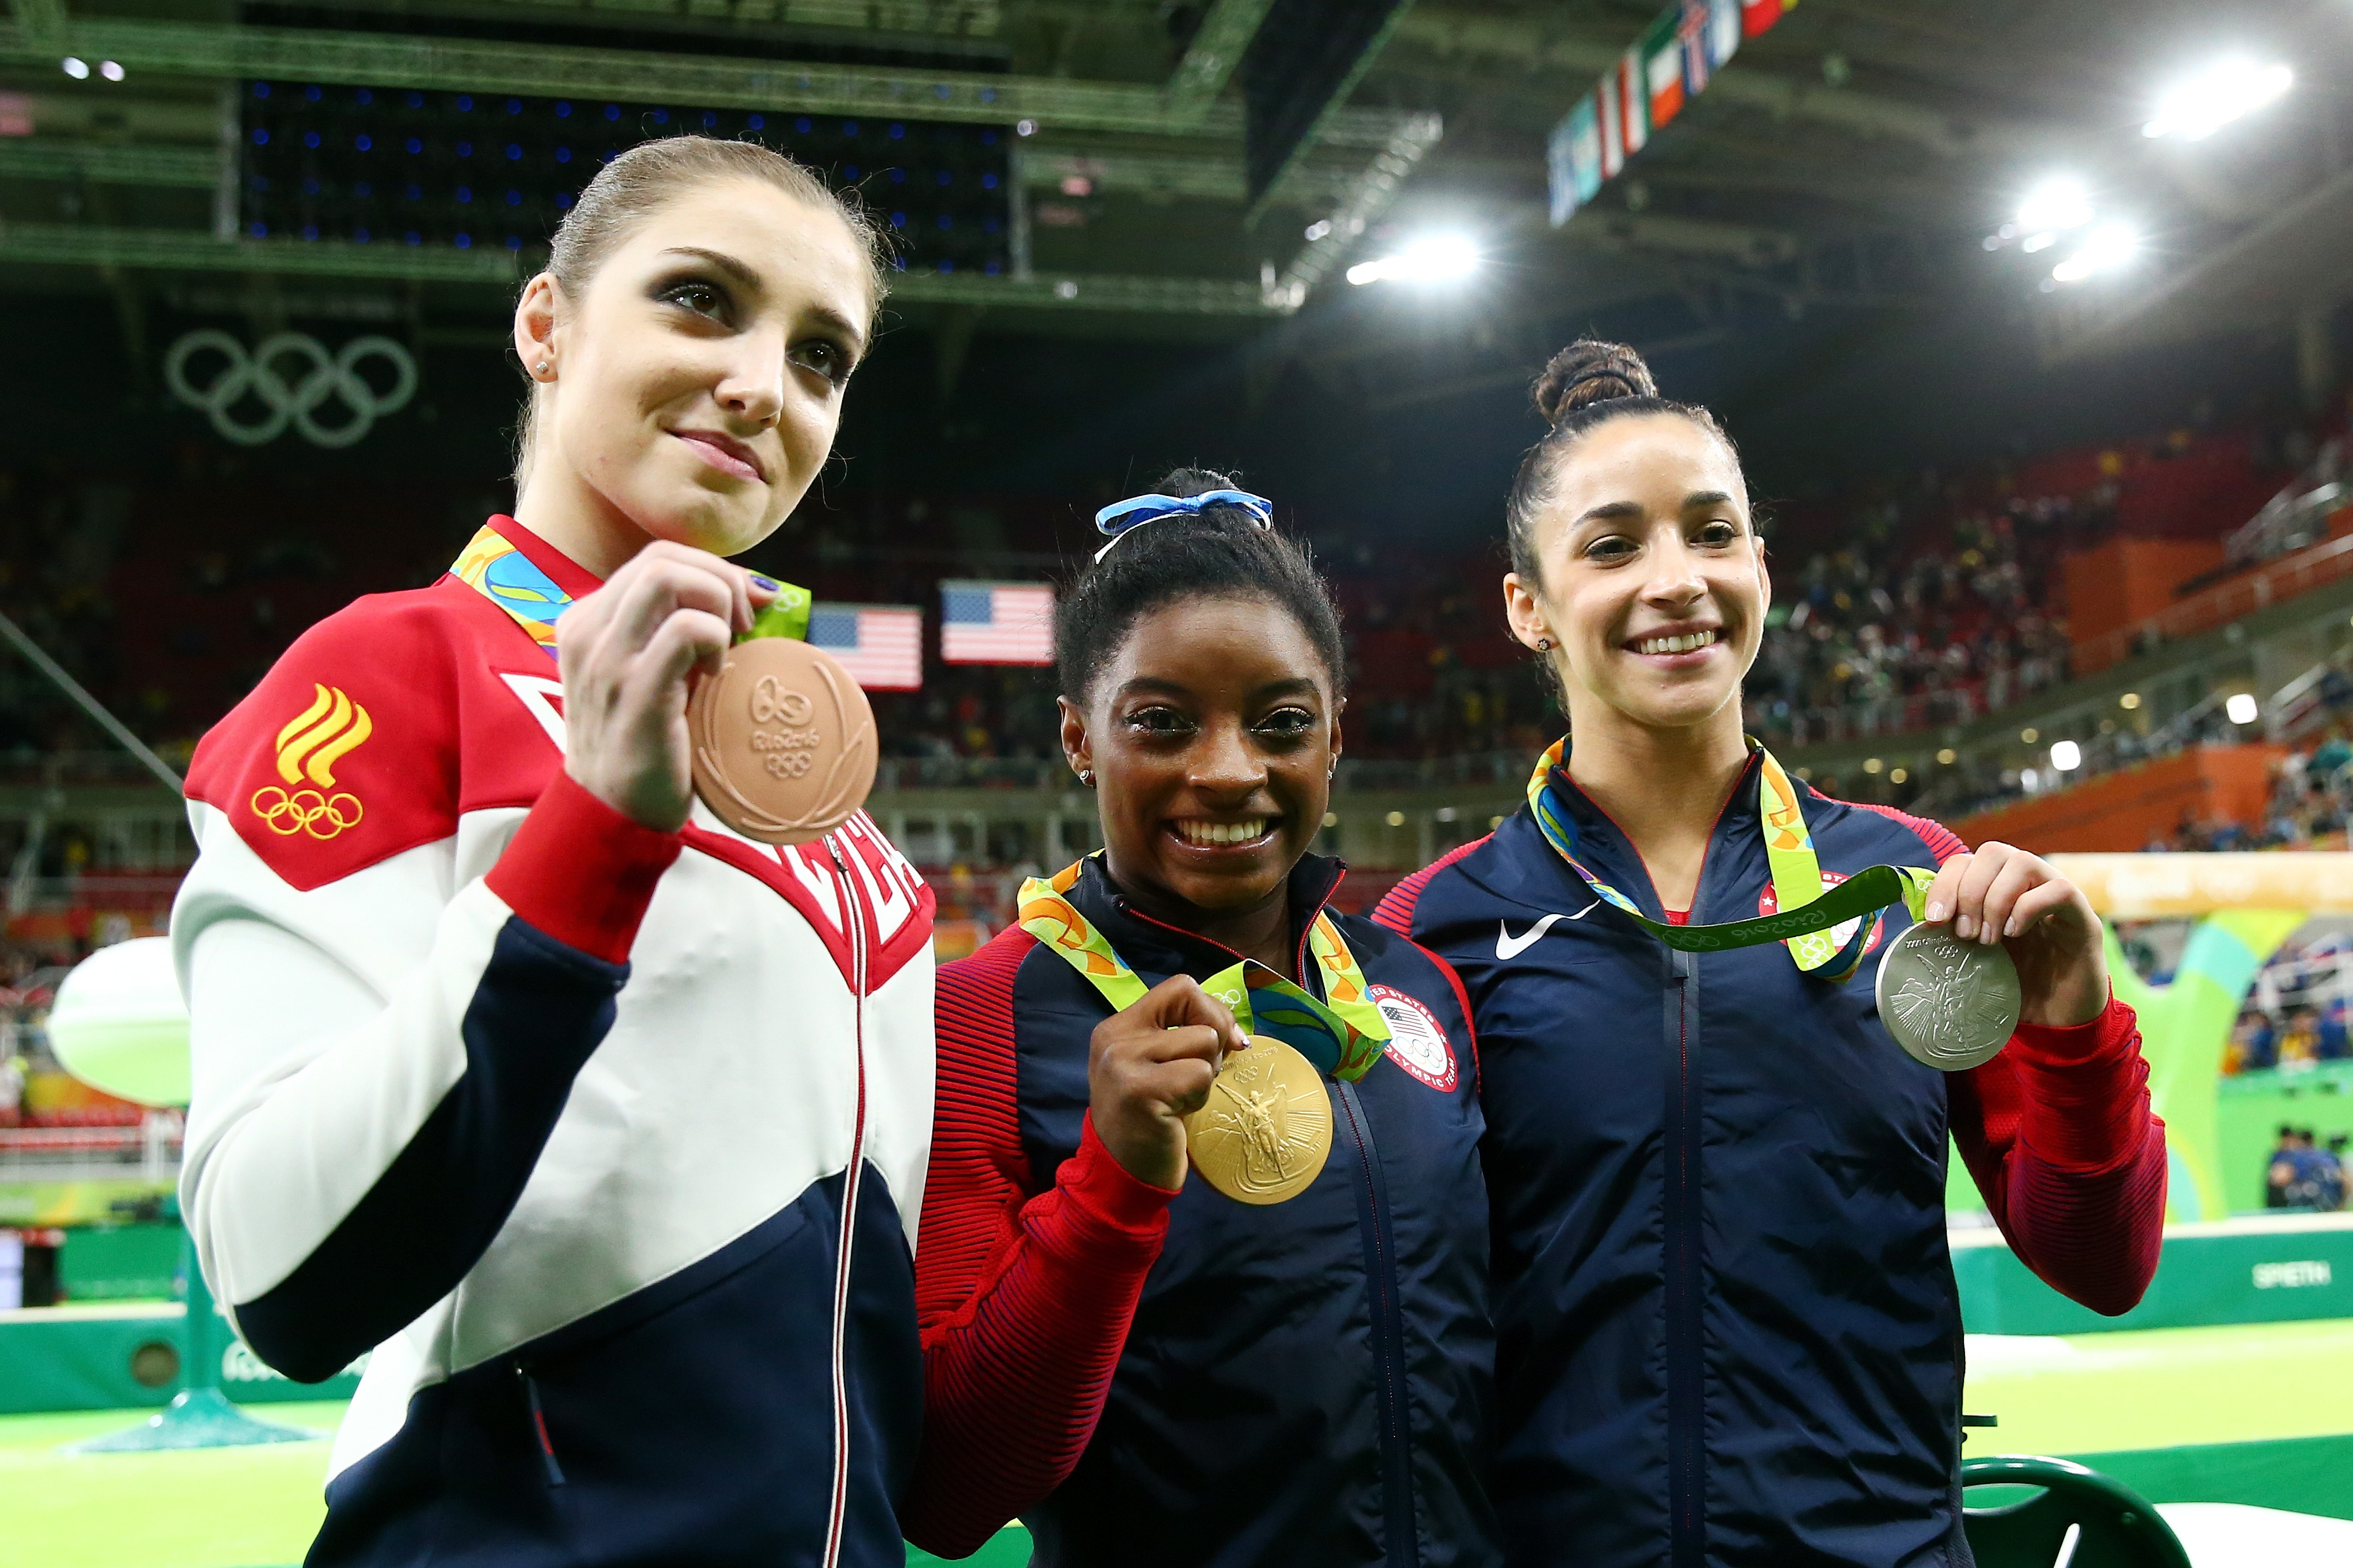 (L to R) Bronze medalist Aliya Mustafina of Russia, gold medalist Simone Biles of the United States and silver medalist Alexandra Raisman of the United States pose for photographs after the medal ceremony for the Women's Individual All Around on Day 6 of the 2016 Rio Olympics.  (Photo by Alex Livesey/Getty Images)